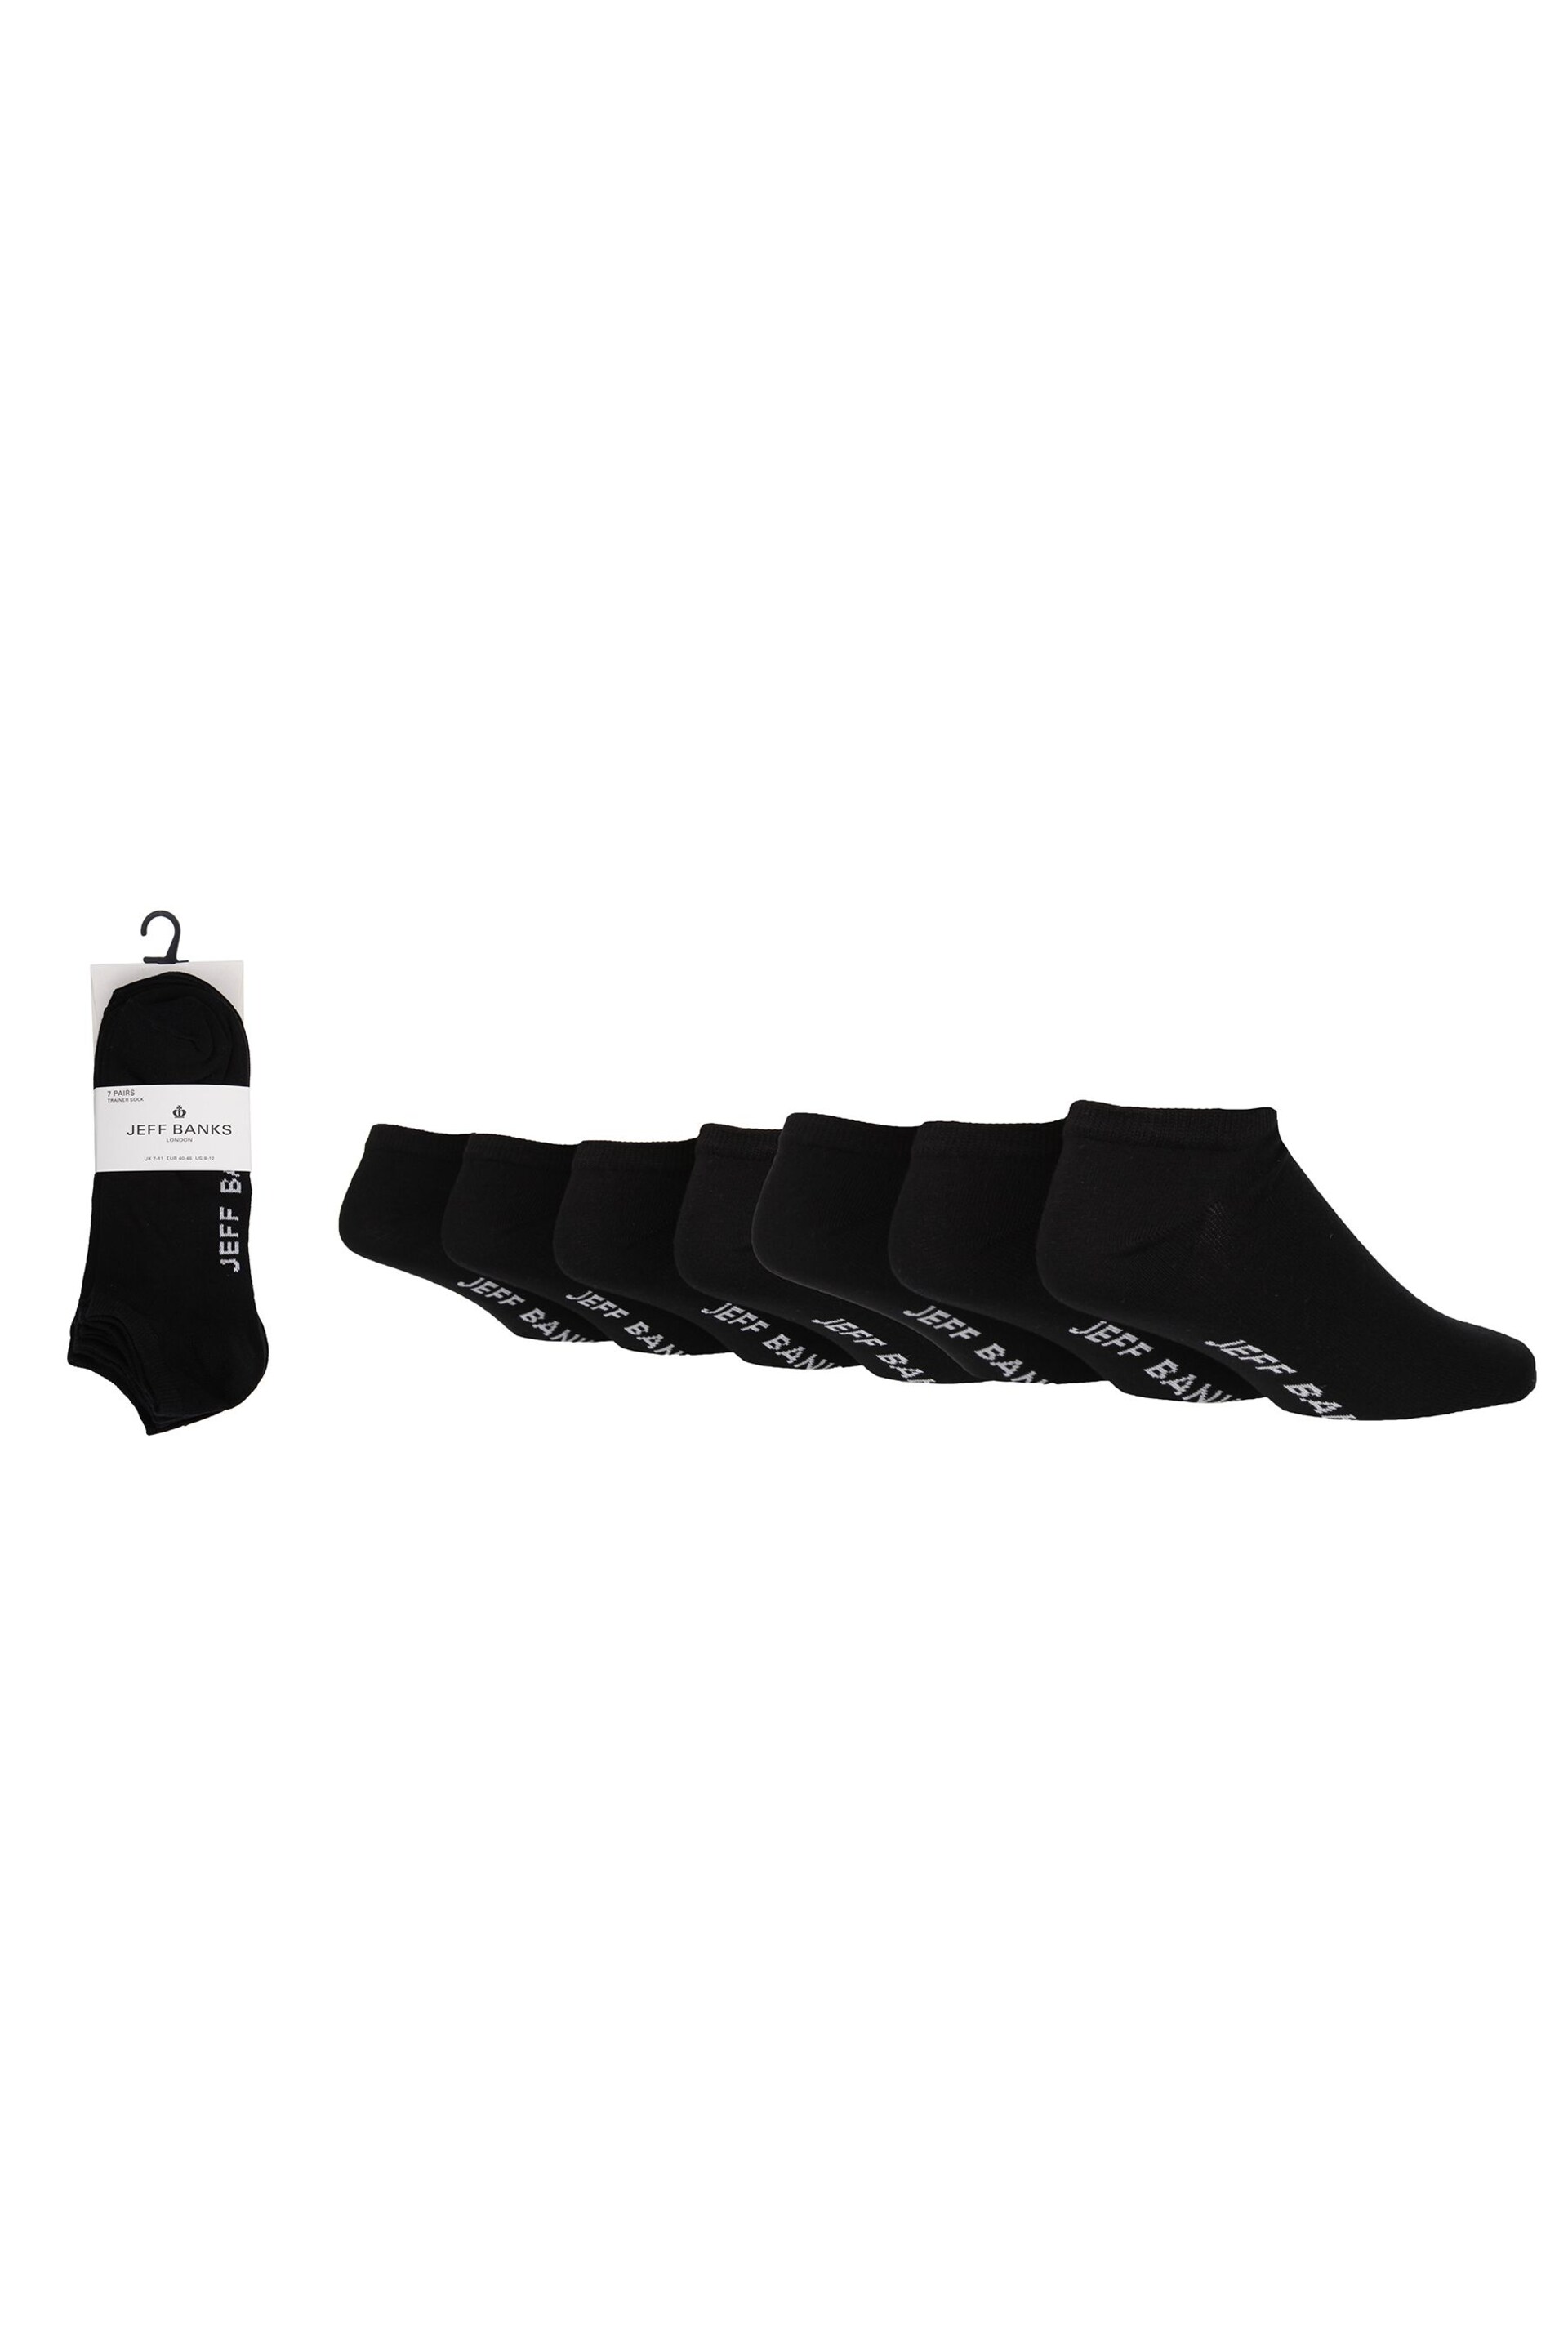 Jeff Banks Black Classic Trainer Liners Socks 7 Pack - Image 2 of 5